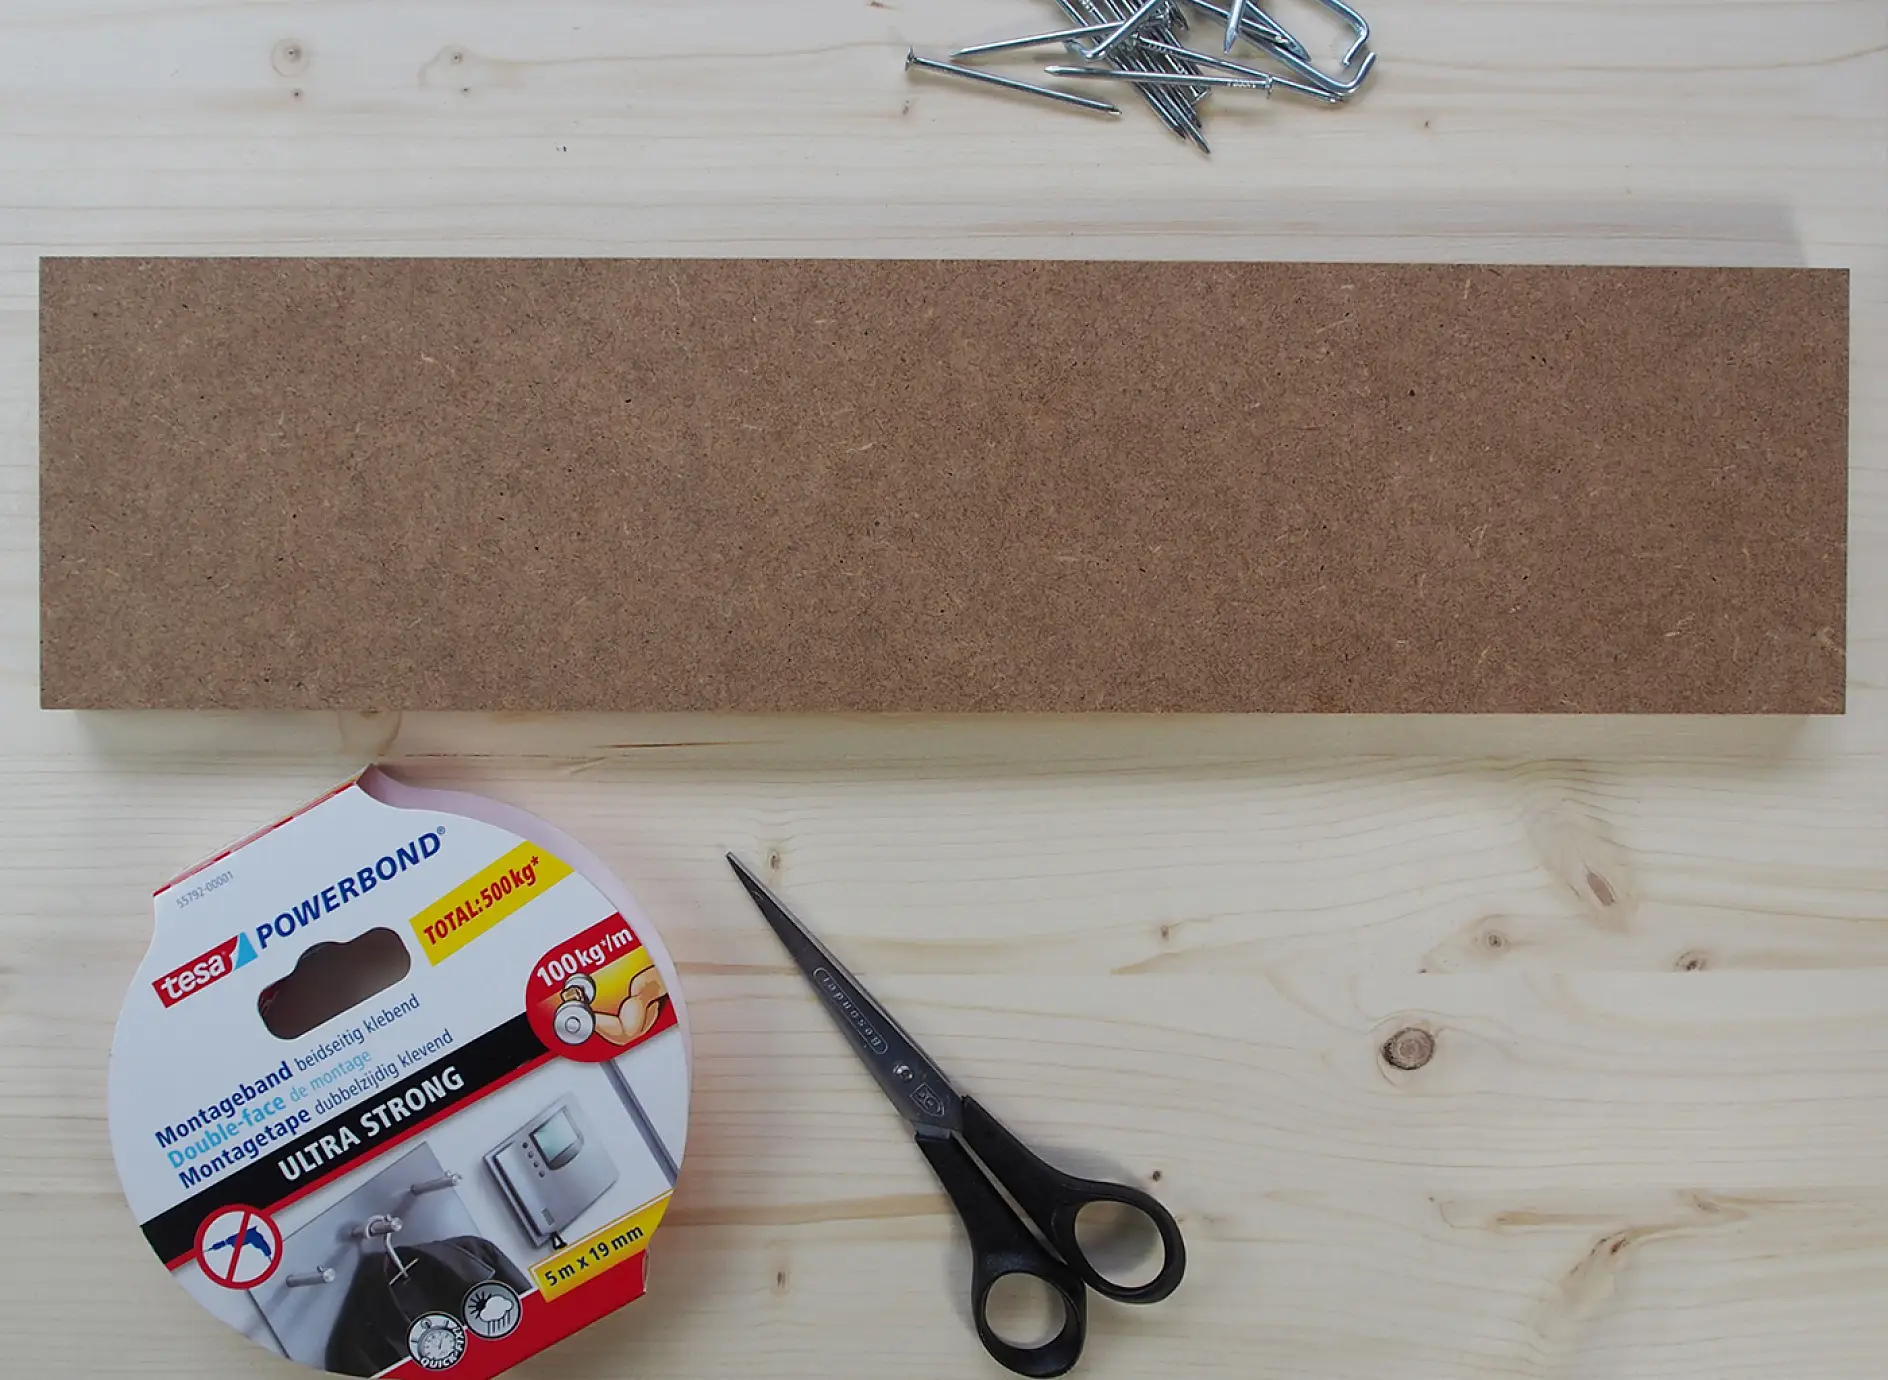 Image of nails, hardwood, scissors and tesa® Powerbond ULTRA STRONG double-sided adhesive tape.